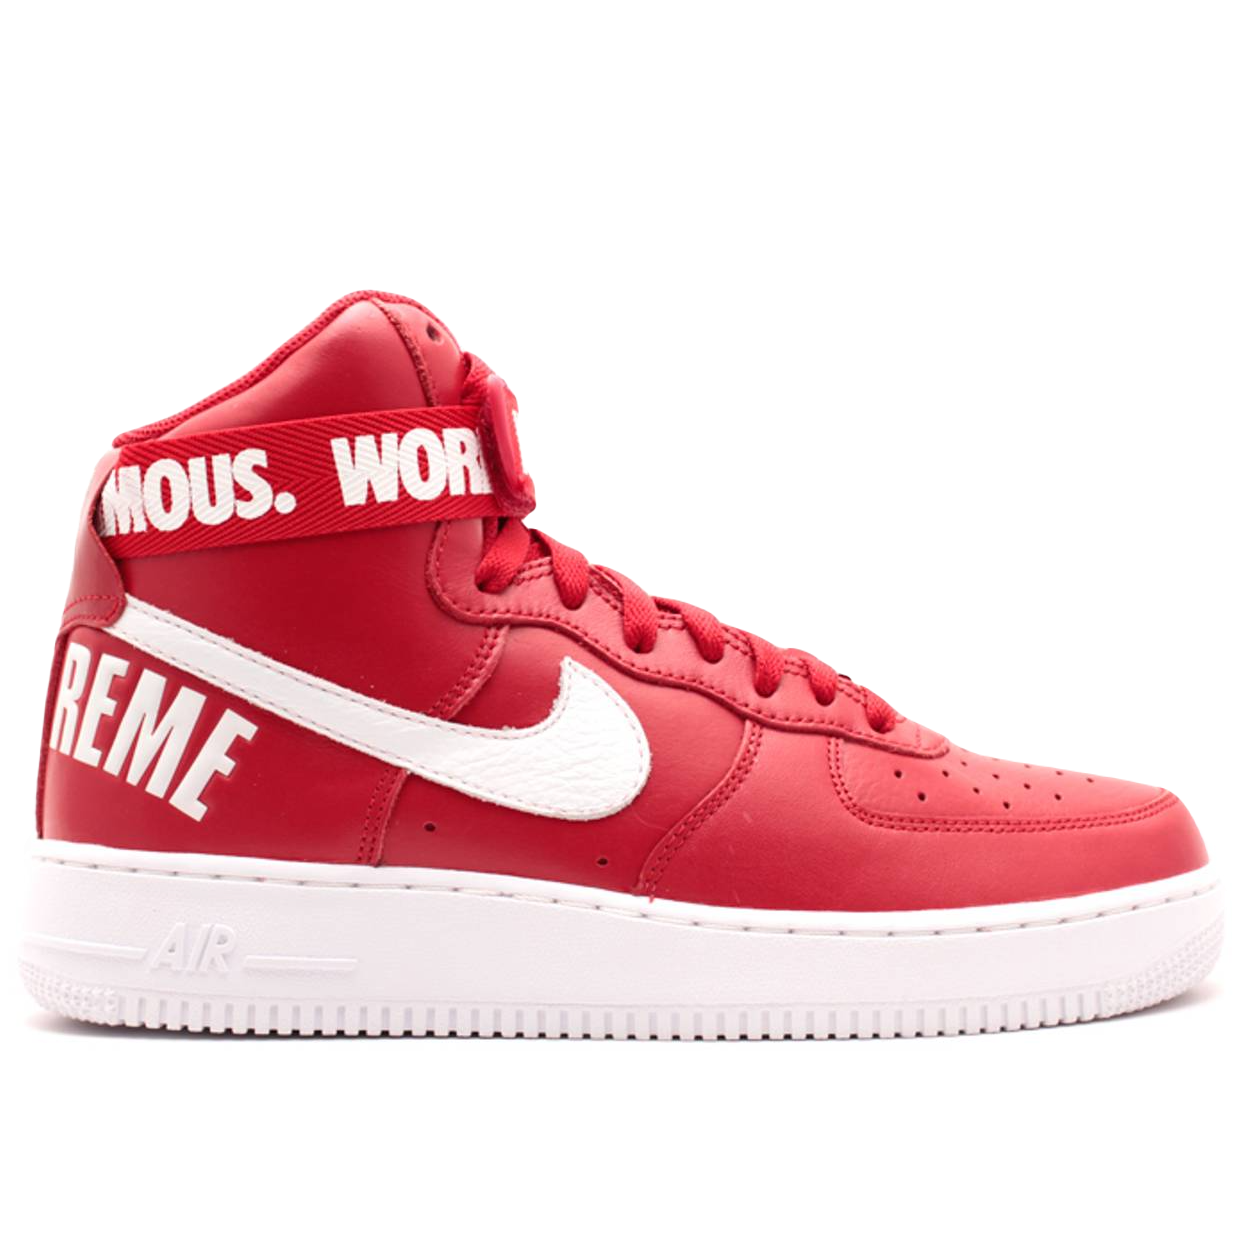 Nike Air Force 1 High Supreme SP - Red - Used